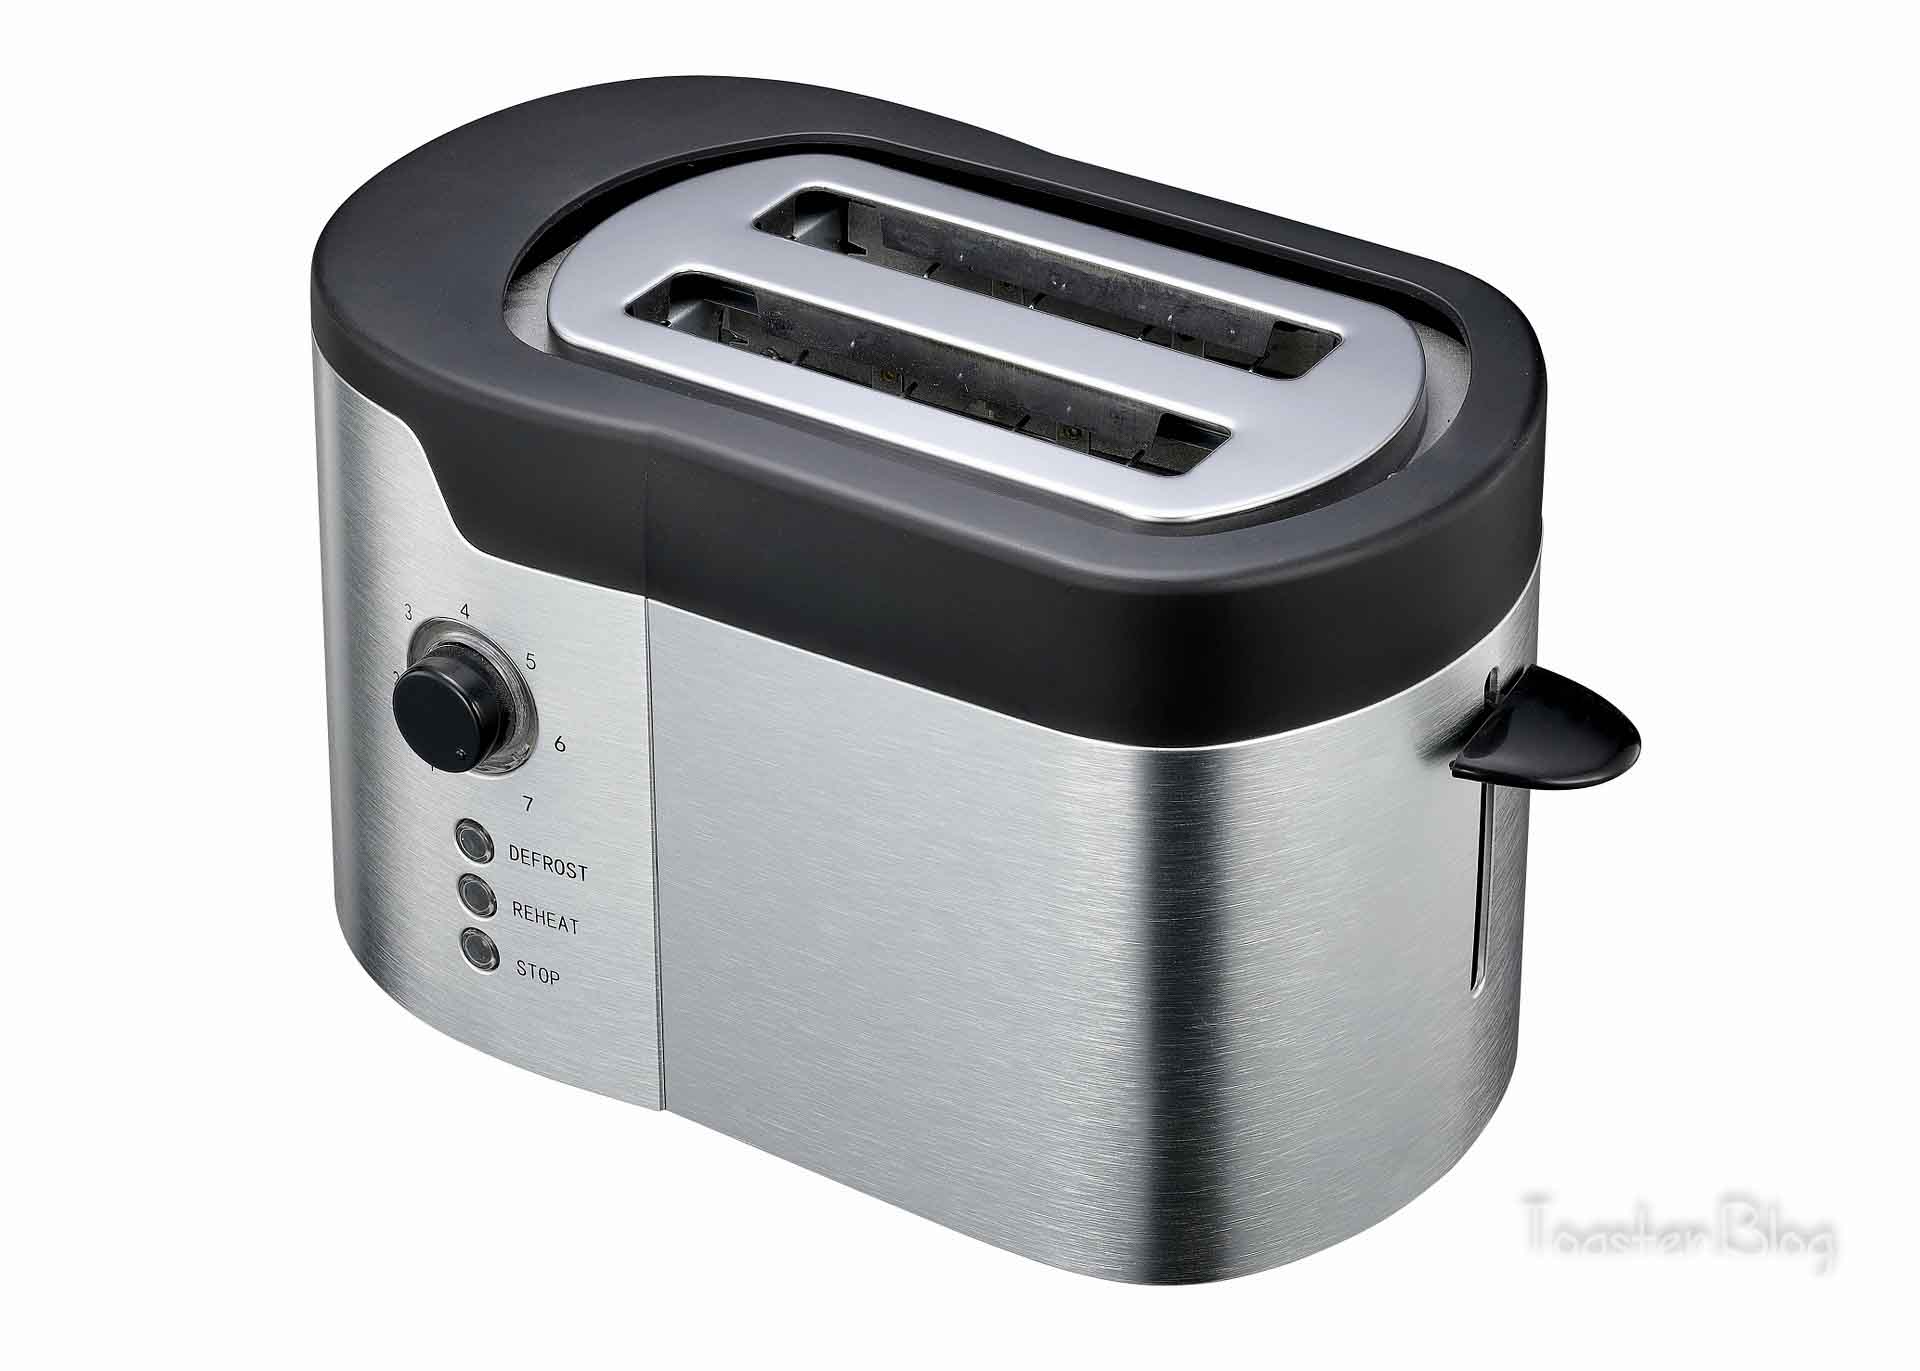 First toaster